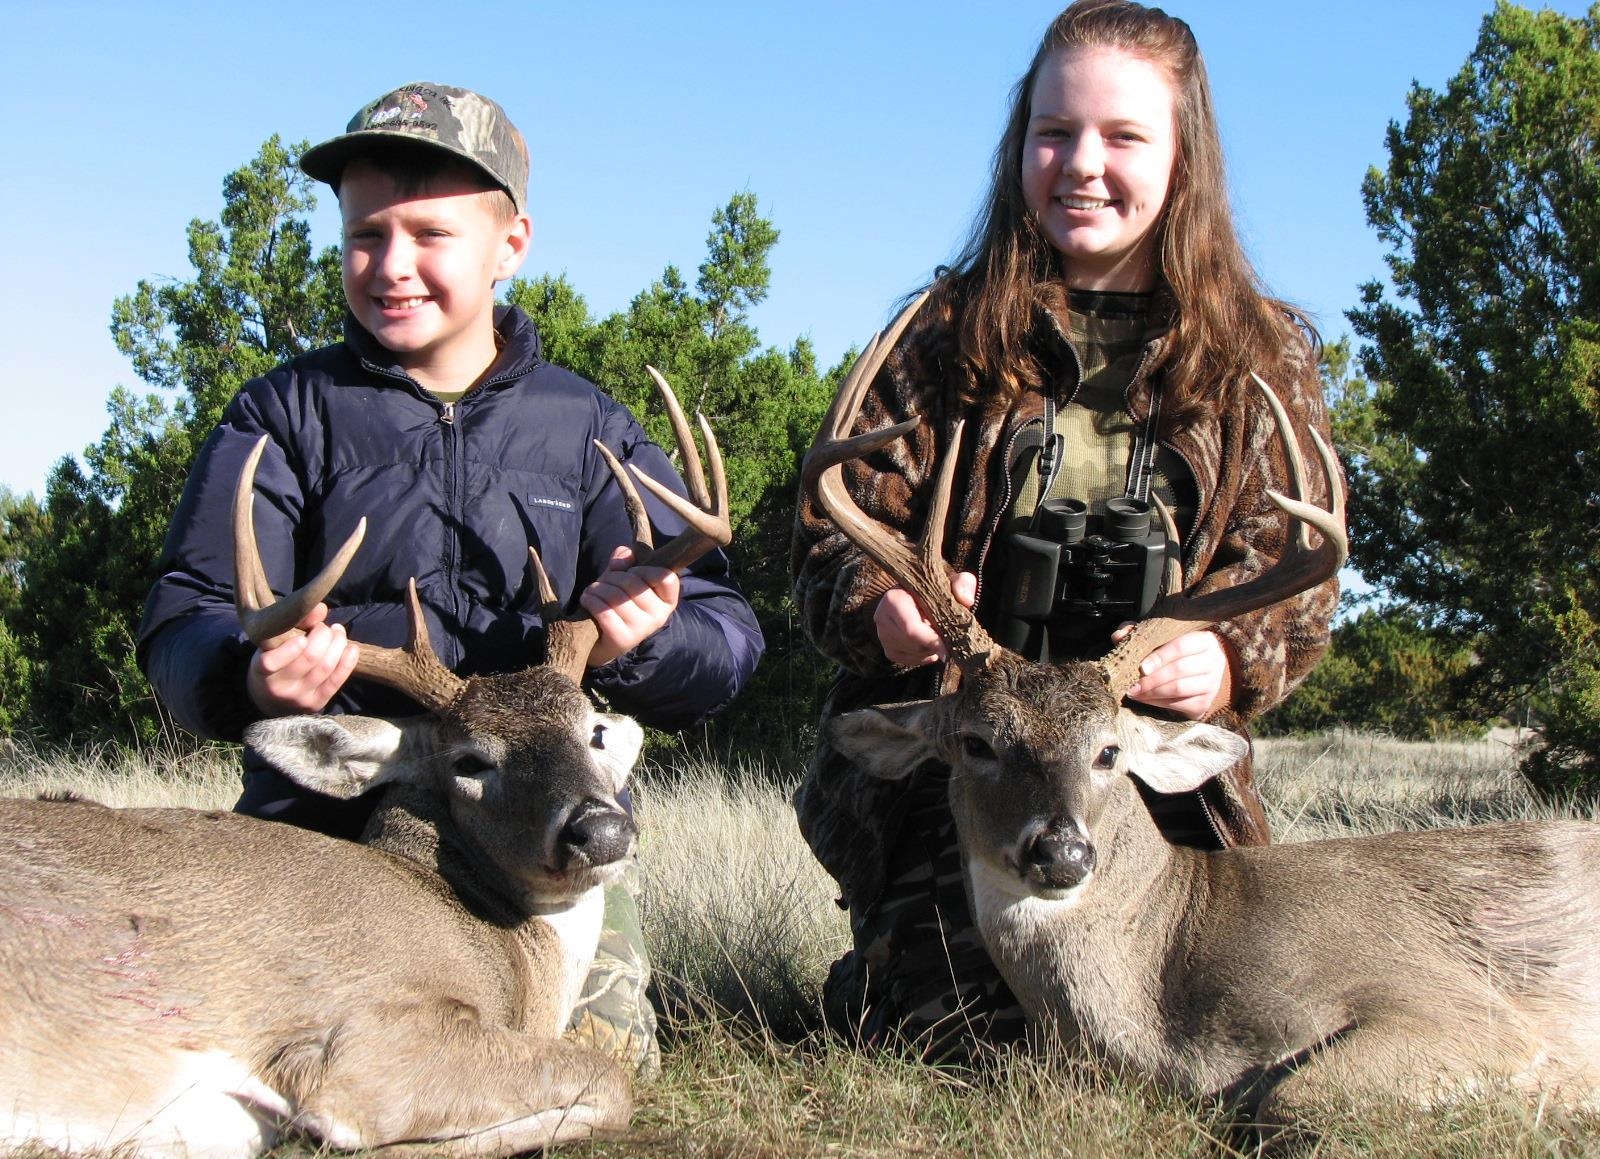  Great hunt this past weekend. Paxton shot his very first buck and Olivia shot her biggest buck to date, as well as accepted Jesus as her savior. Hallelujah! 